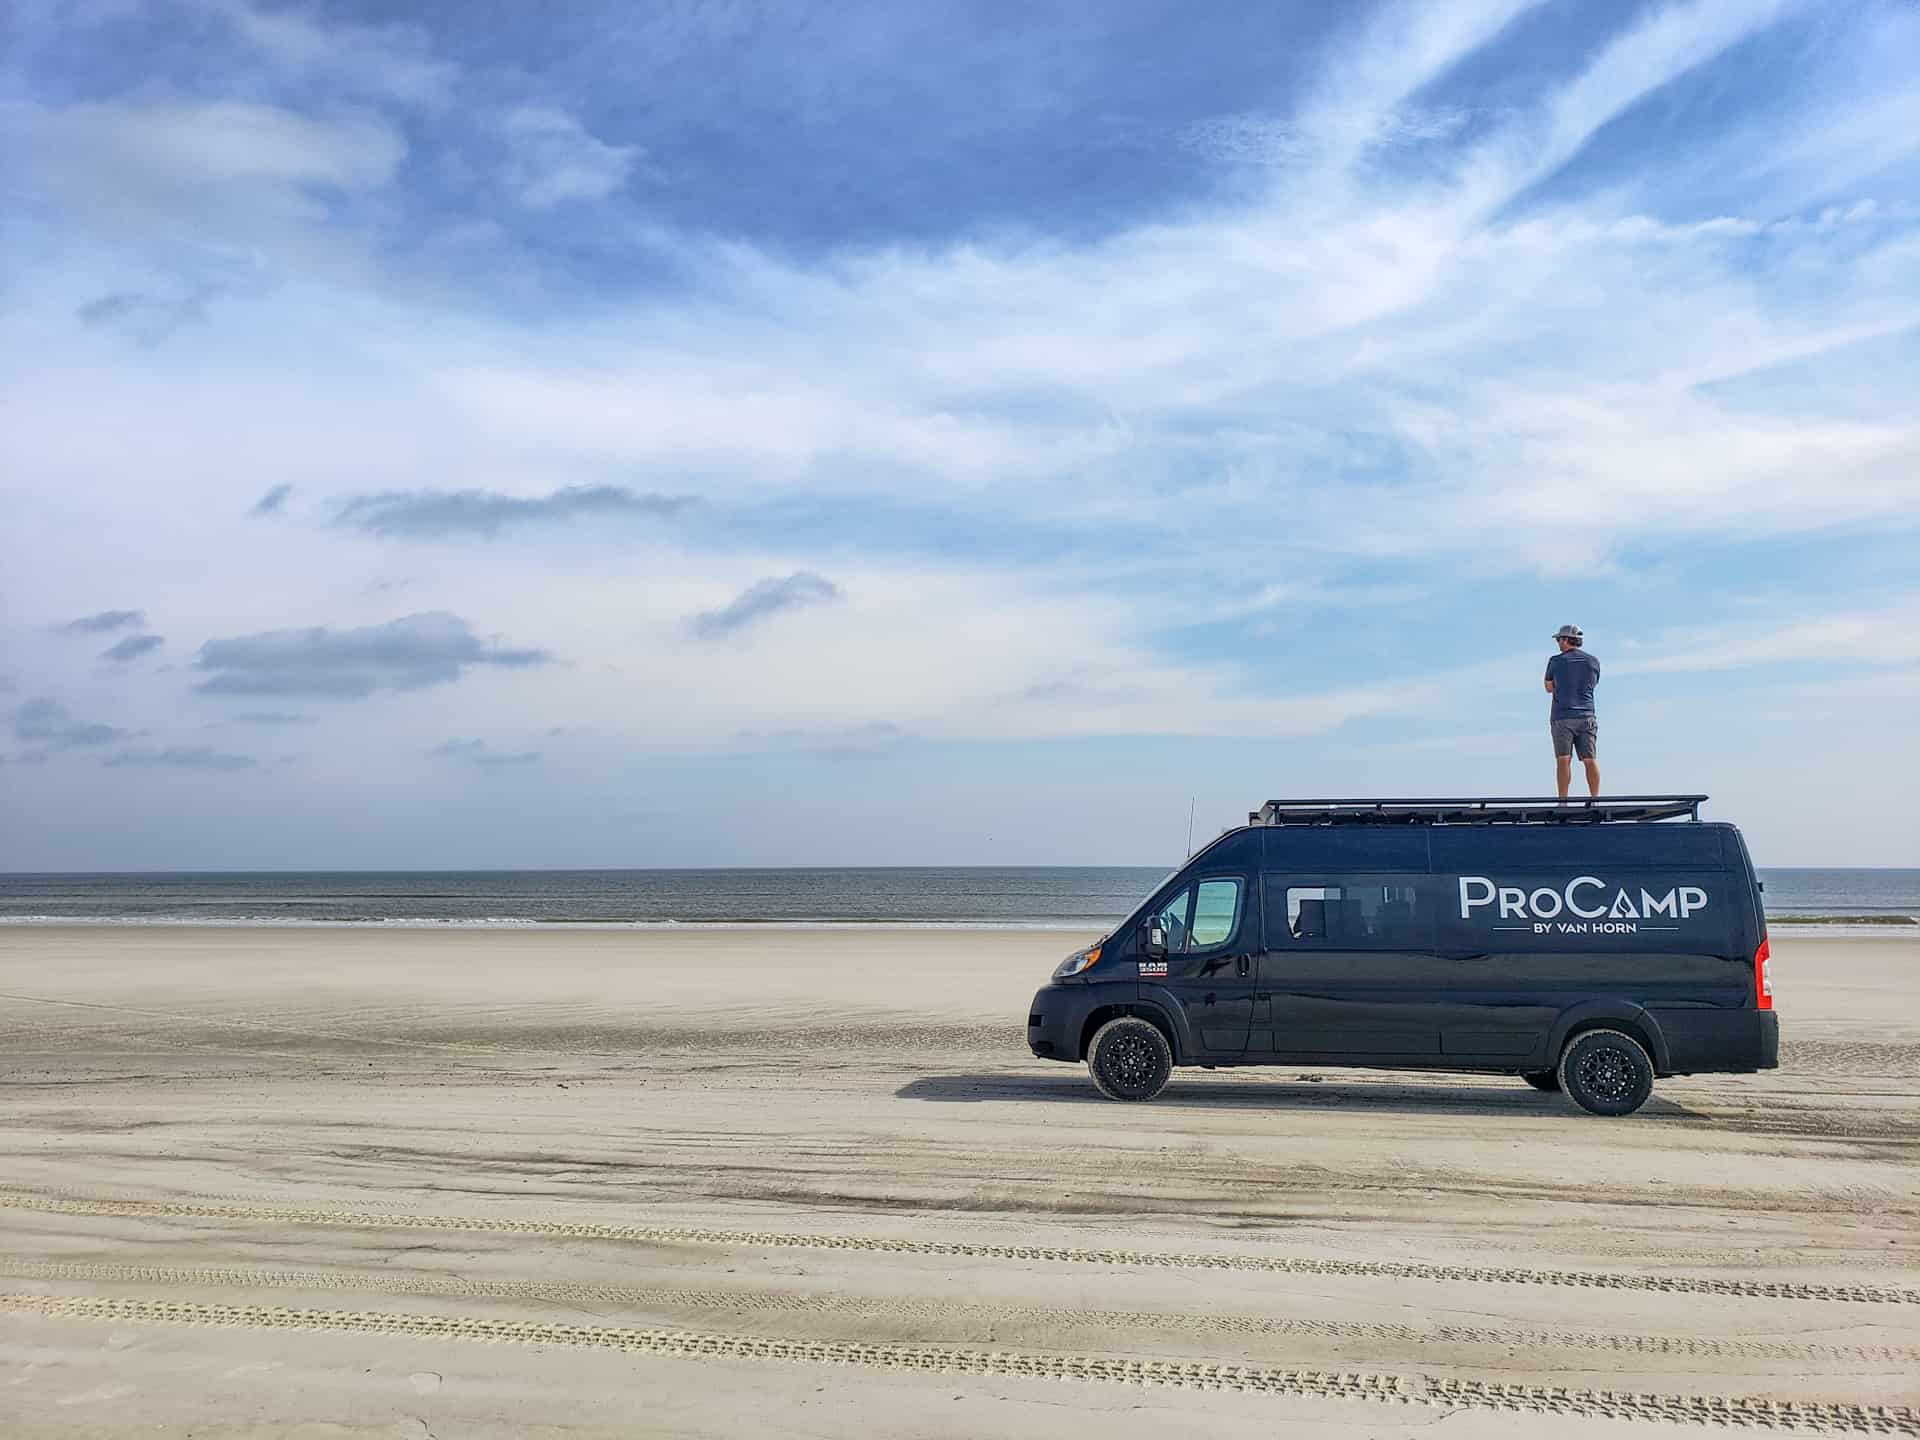 procamp on beach with male standing on top